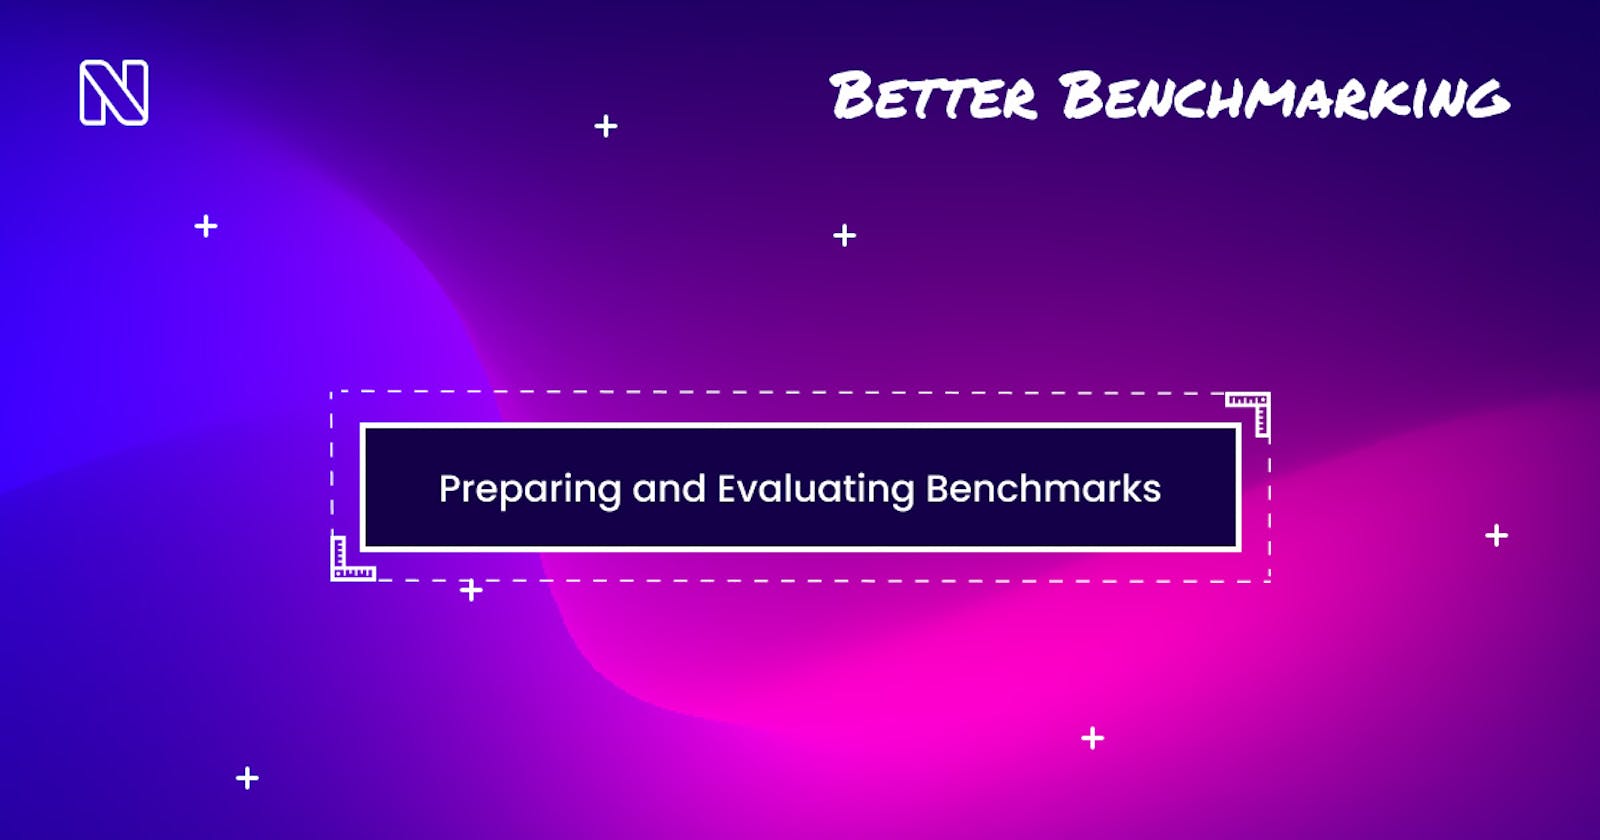 Better Benchmarking: Preparing and Evaluating Benchmarks